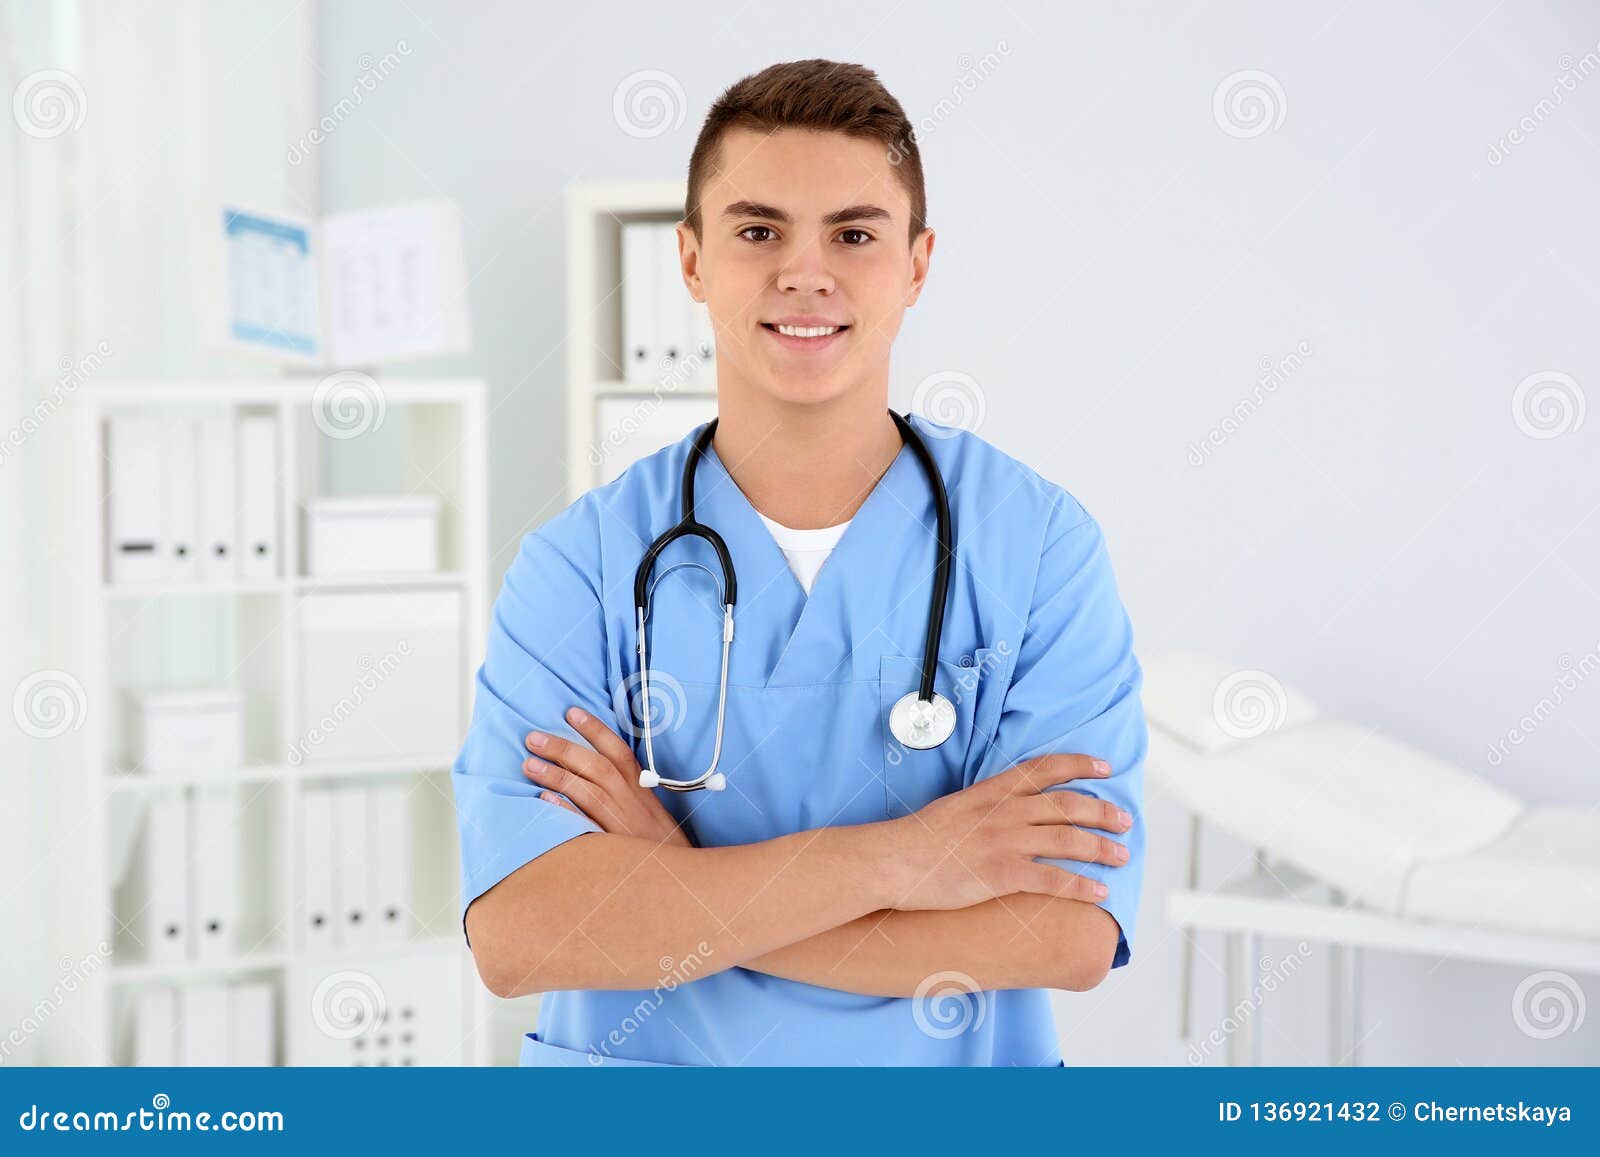 young medical assistant with stethoscope